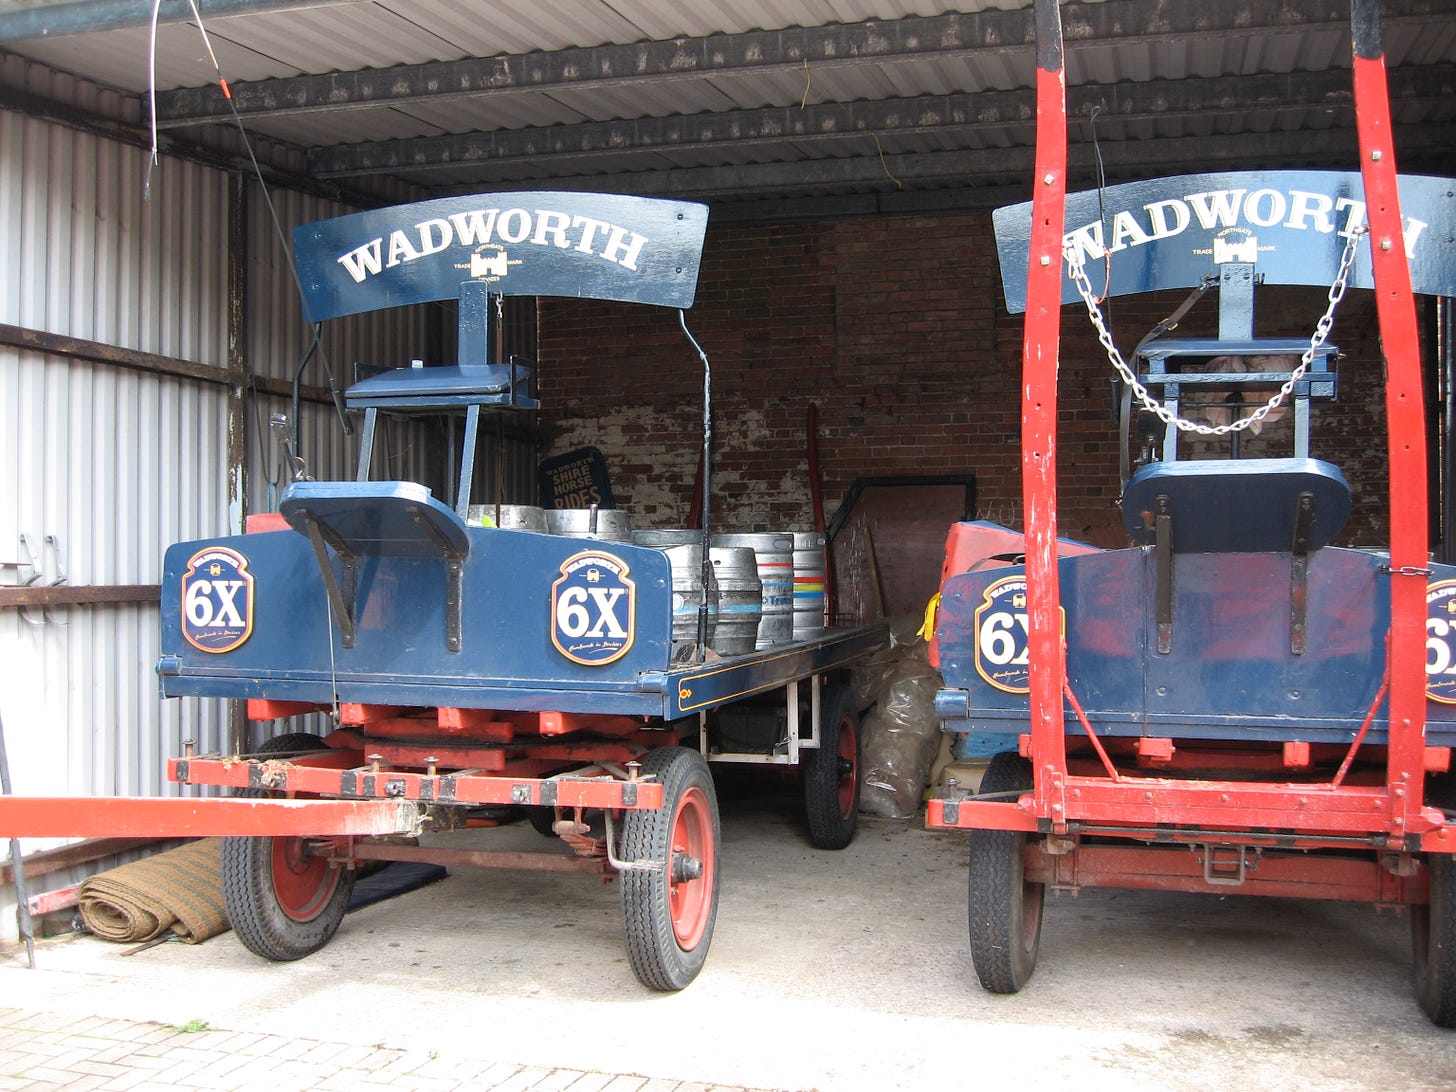 The Wadworth Brewery drays